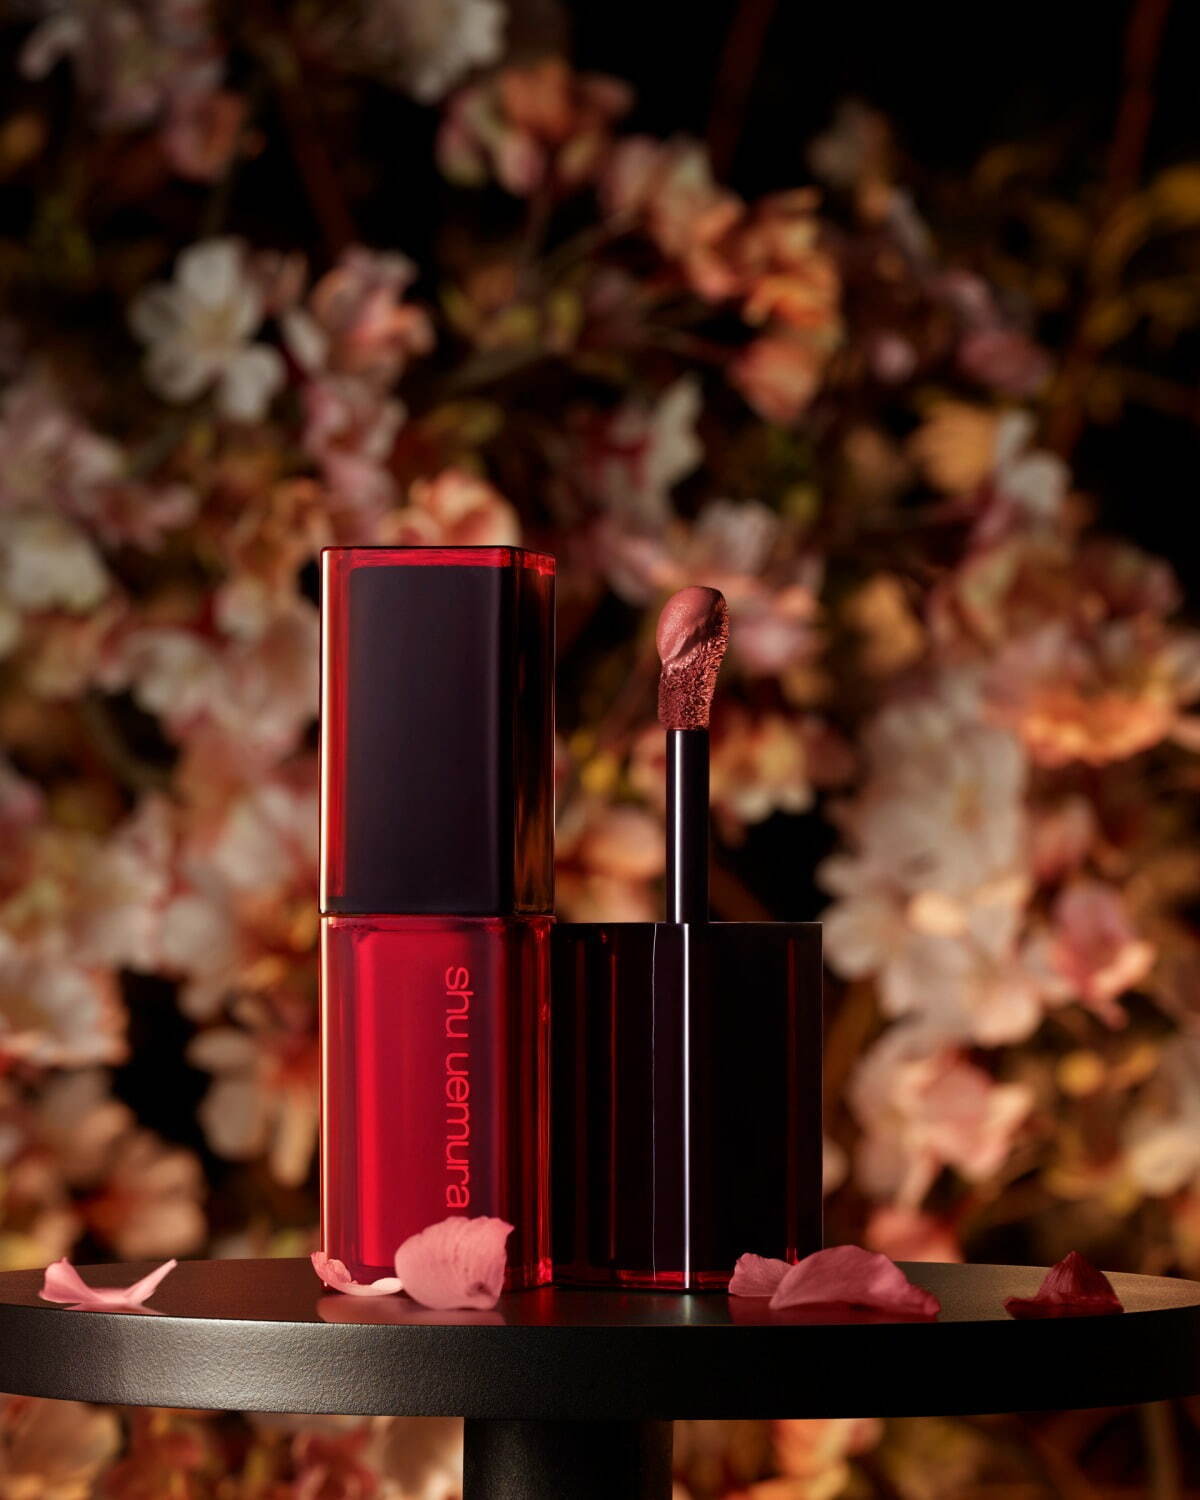 Shu Uemura’s Spring 2023 Beauty Collection